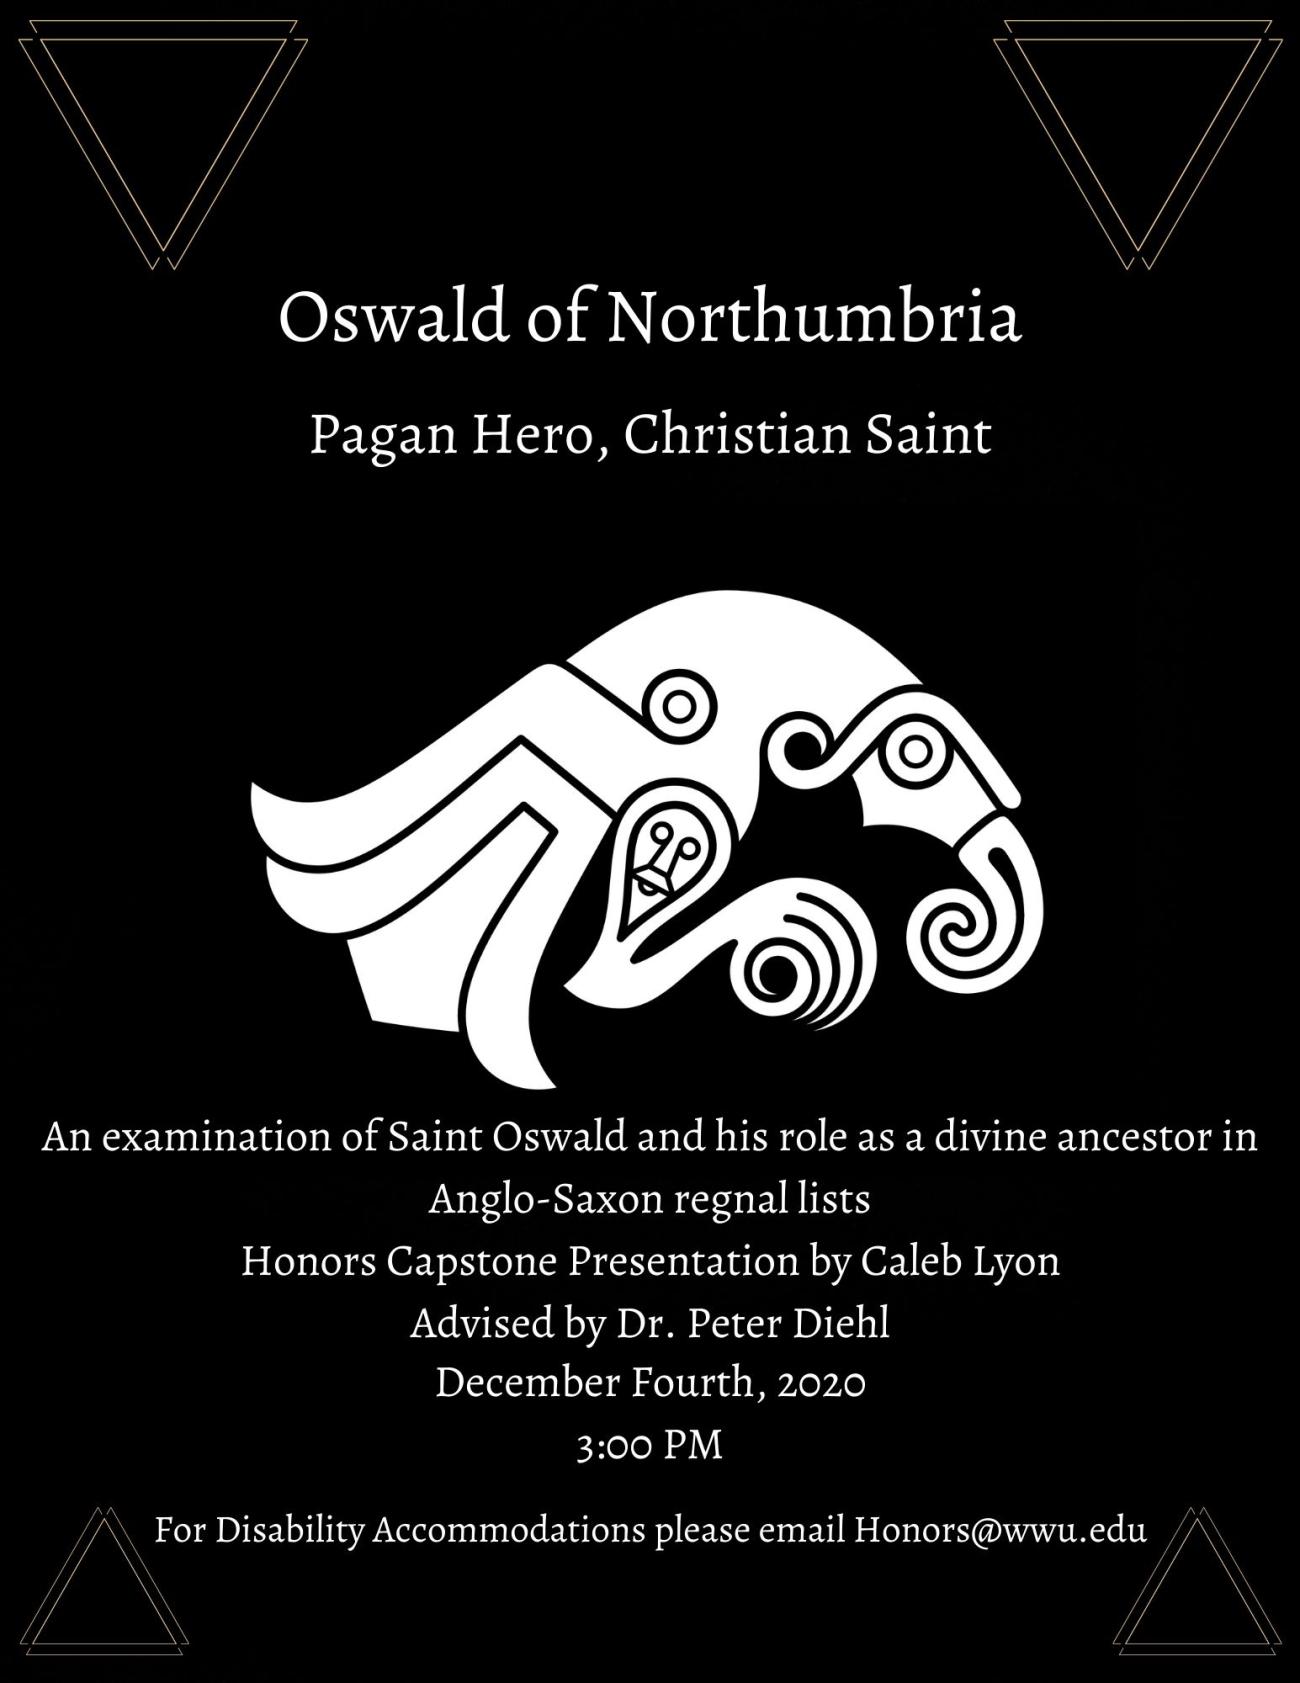 Image: White line drawing of a raven on a black background. Text: "Oswald of Northumbria: Pagan Hero, Christian Saint. An Examination of Saint Oswald and his role as a divine ancestor in Anglo-Saxon regnal lists. Honors Capstone Presentation by Caleb Lyon. Advised by Dr. Peter Diehl. December Fourth, 2020, 3:00 PM. For disability accommodations please email honors@wwu.edu"